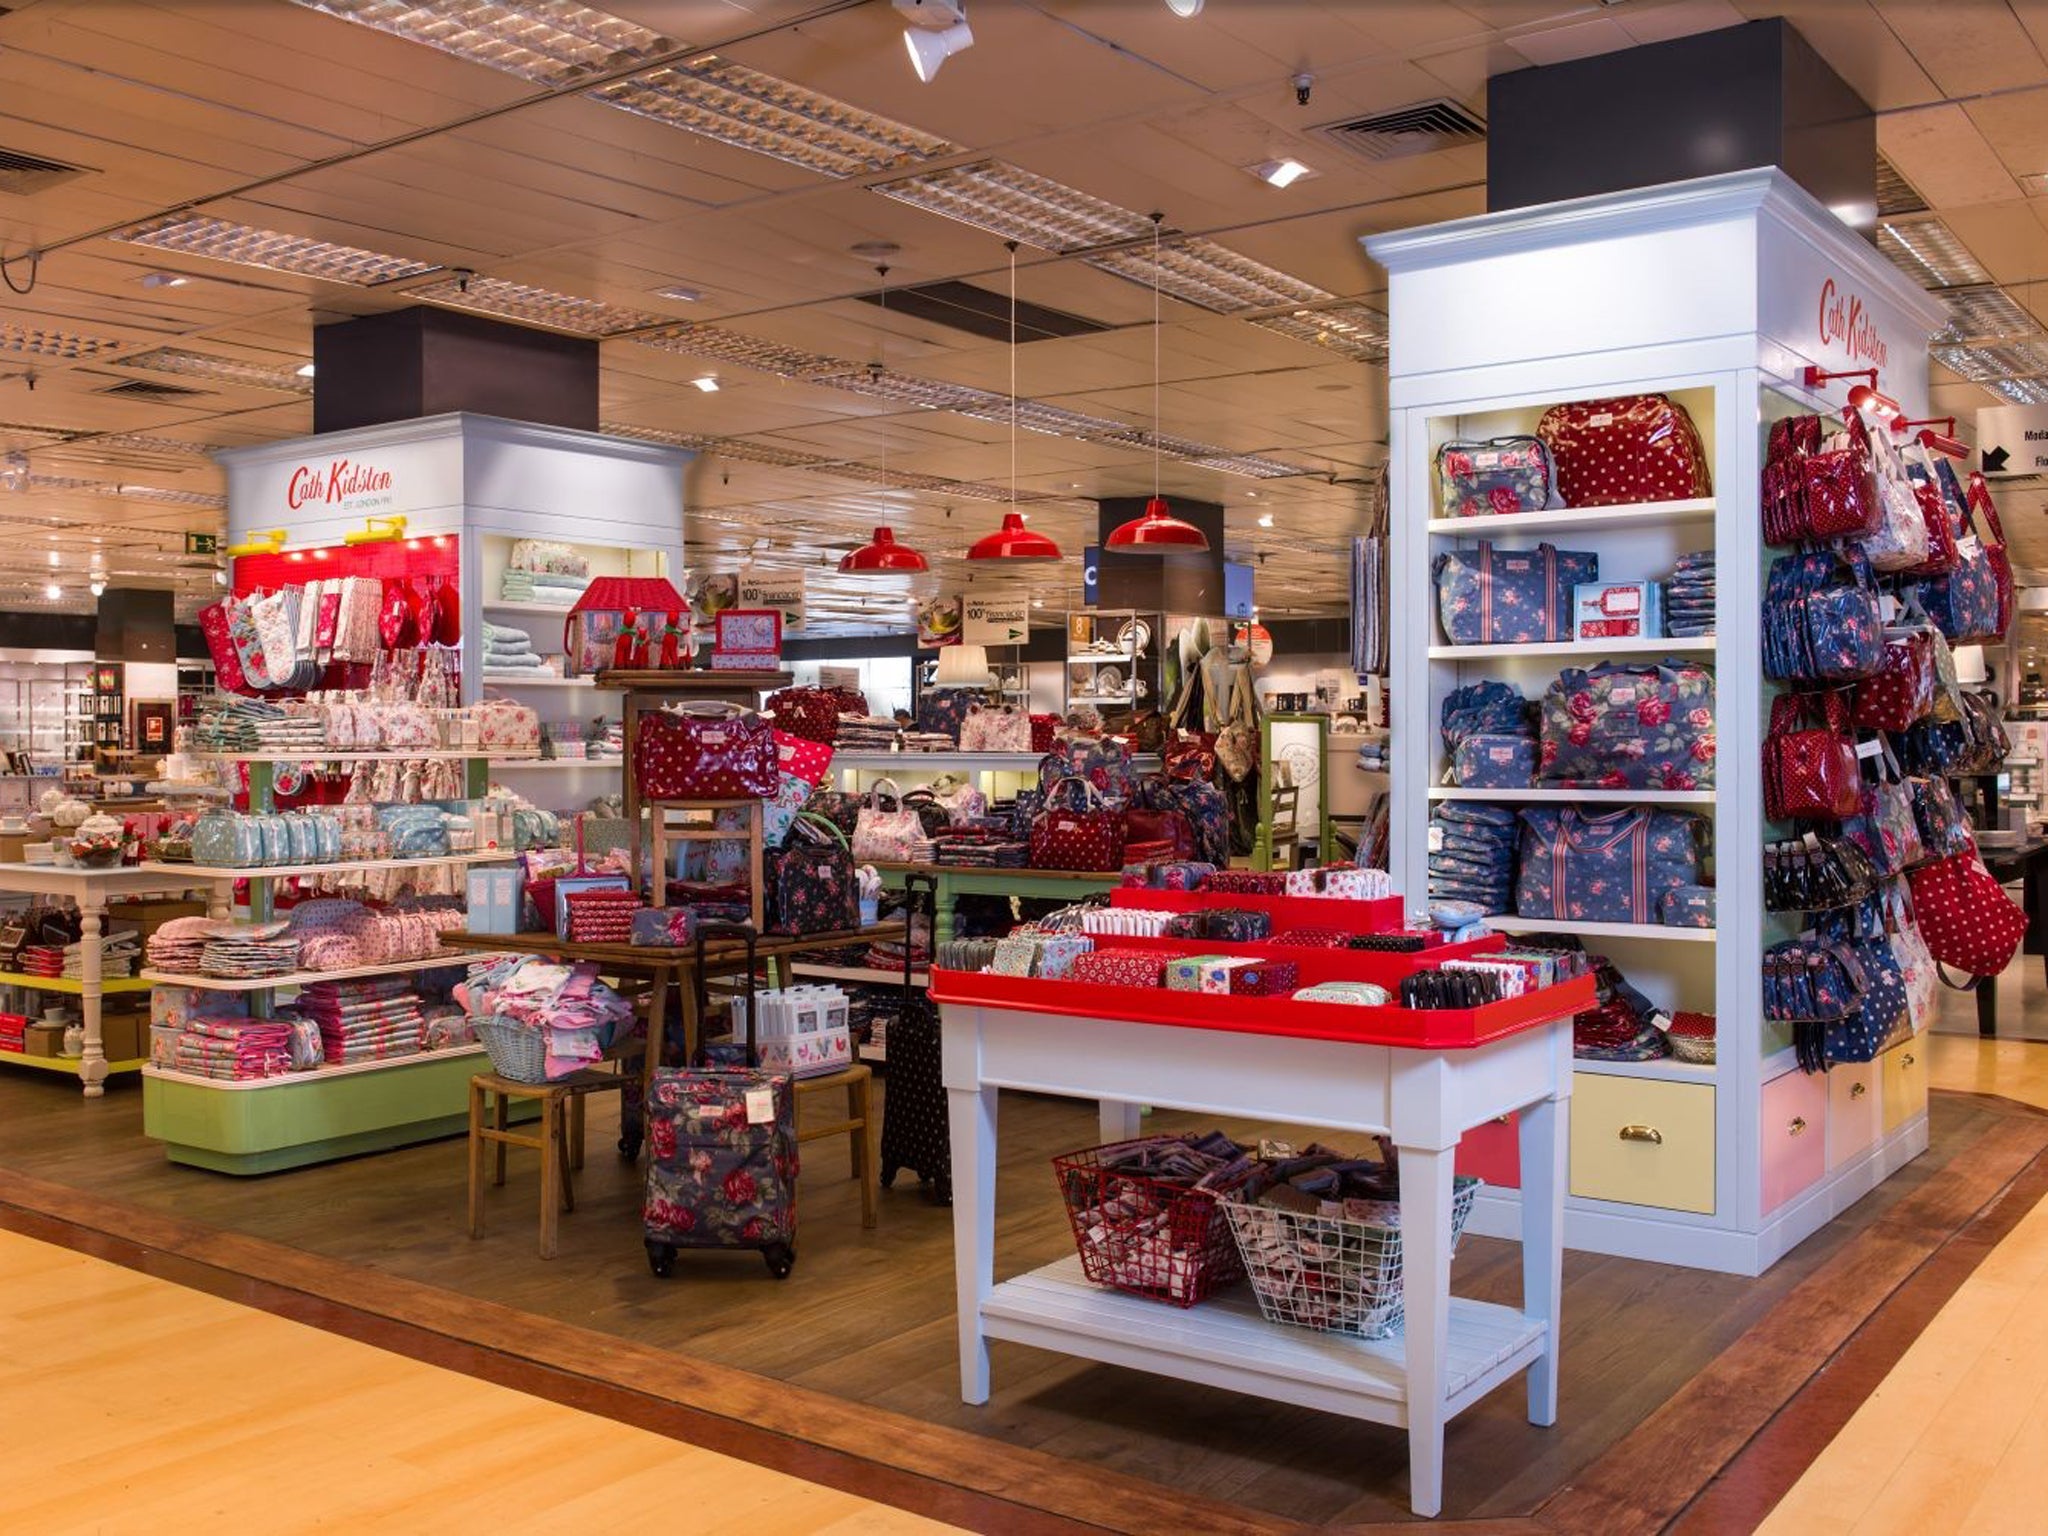 British sales at Cath Kidston rose 21 per cent in the year to March